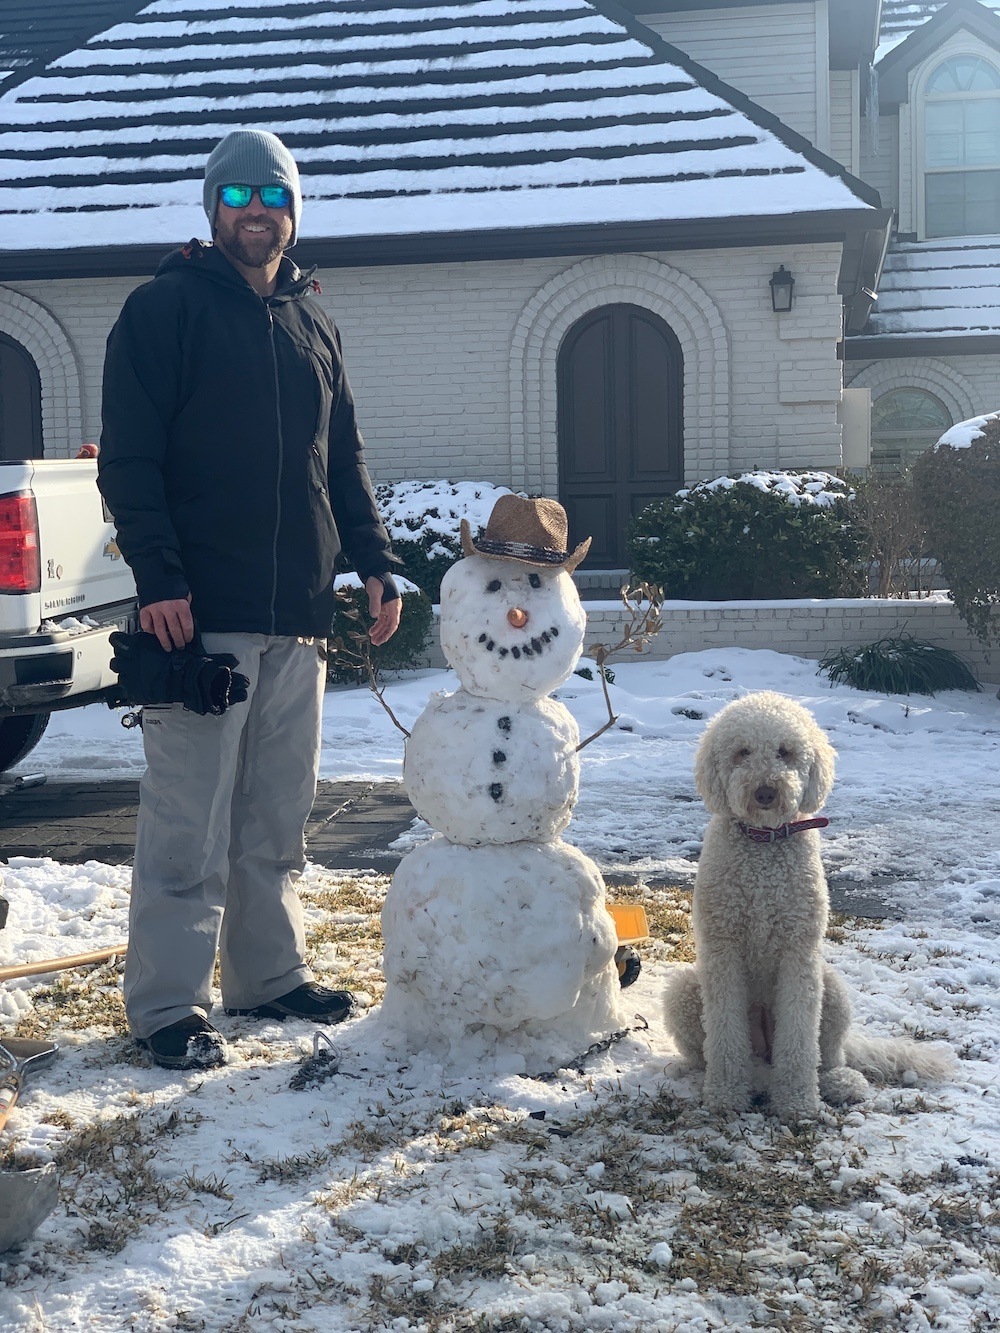 Adam posing with a snowman and dog